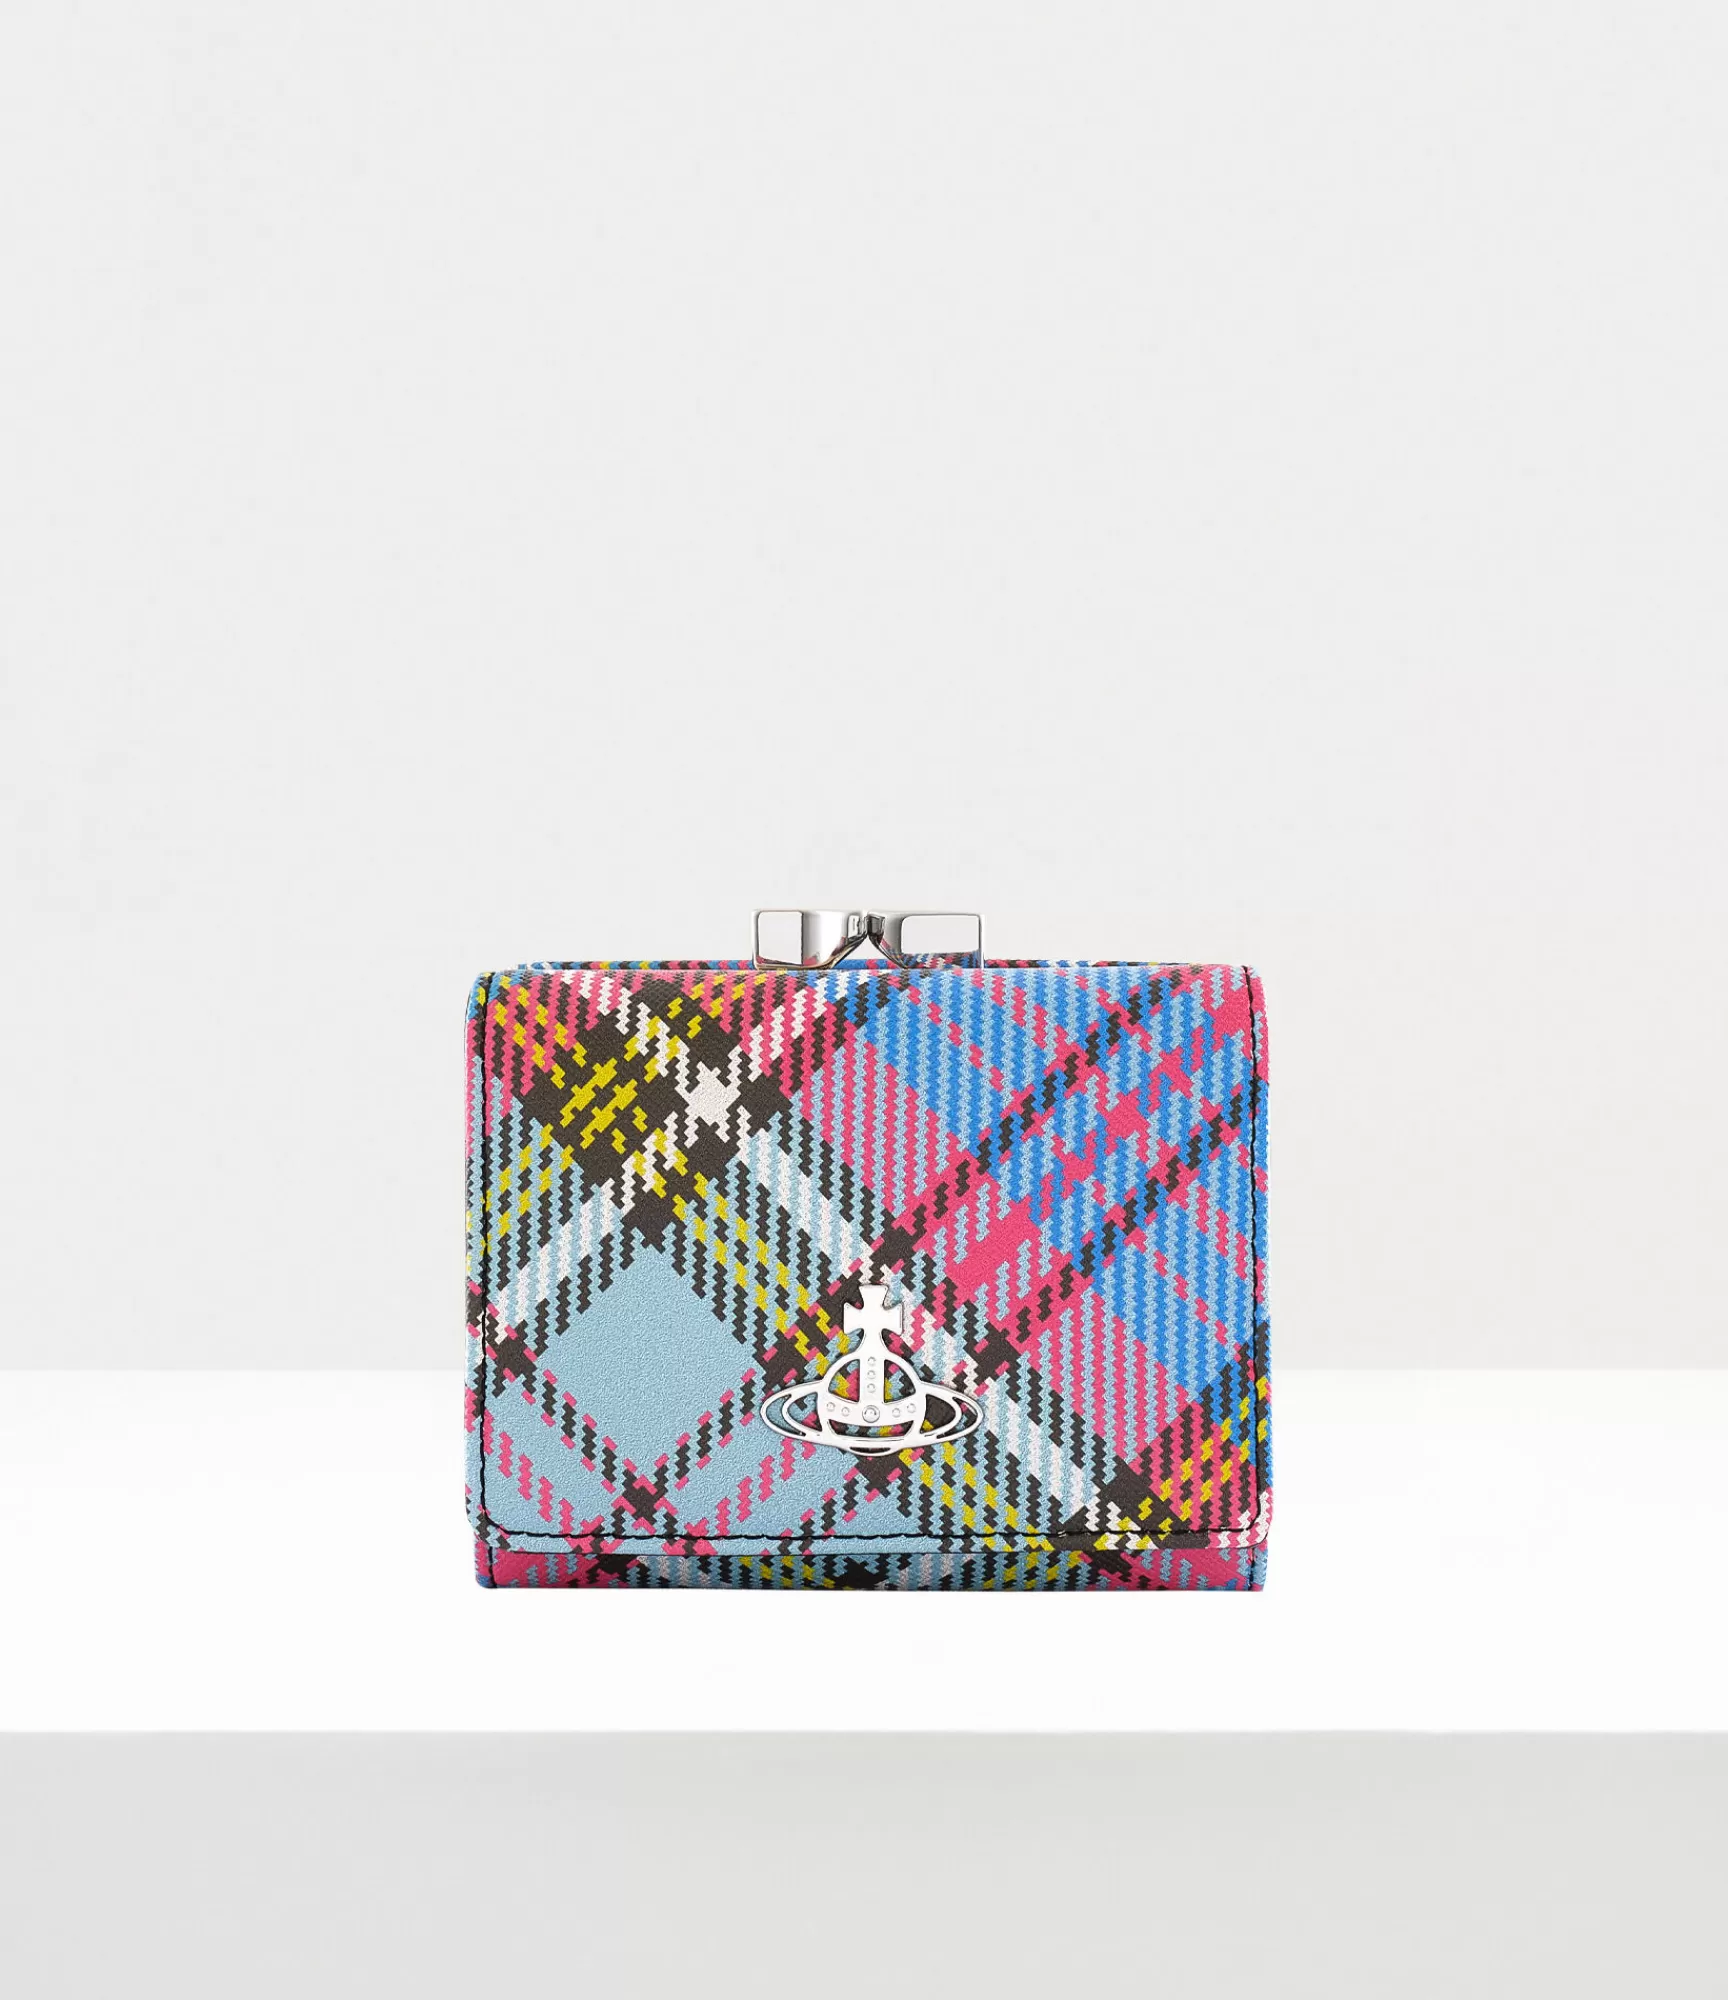 Vivienne Westwood Wallets and Purses*BIOGREEN SAFFIANO PRINTED SMALL FRAME WALLET Macandy Tartan